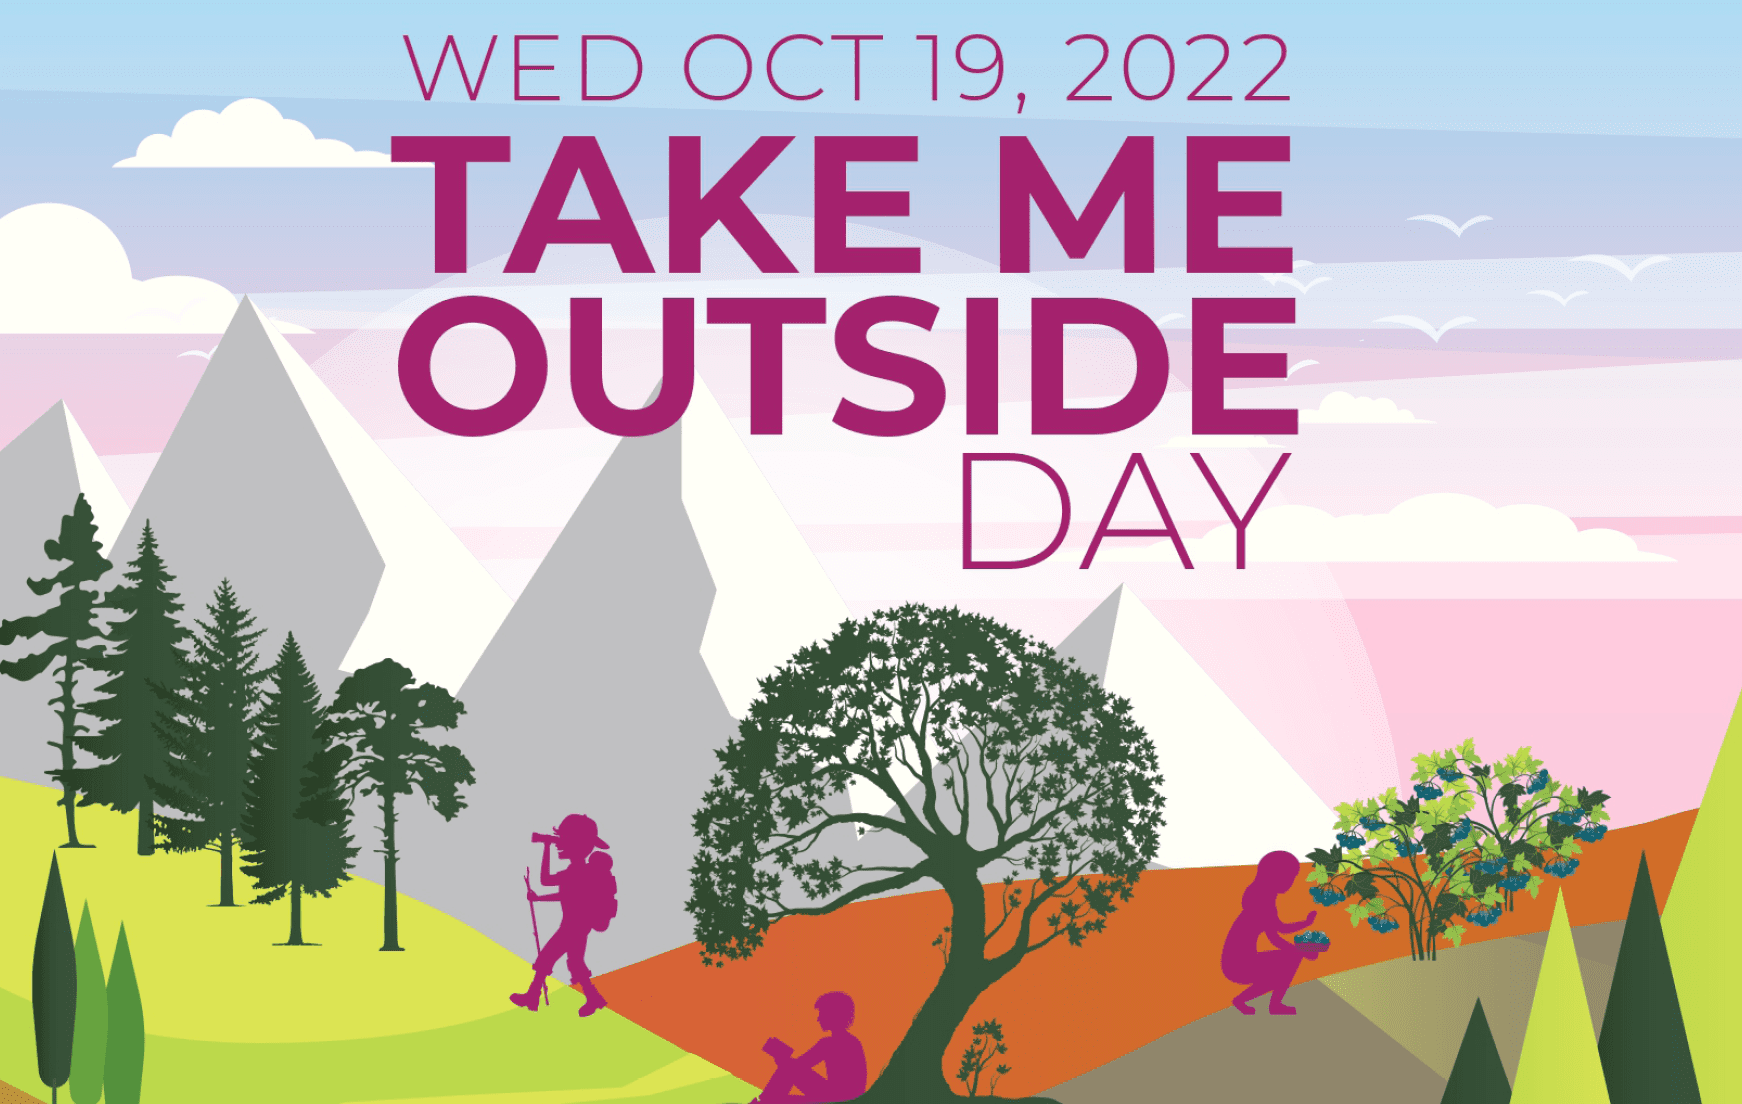 Take Me Outside Day is October 19th!